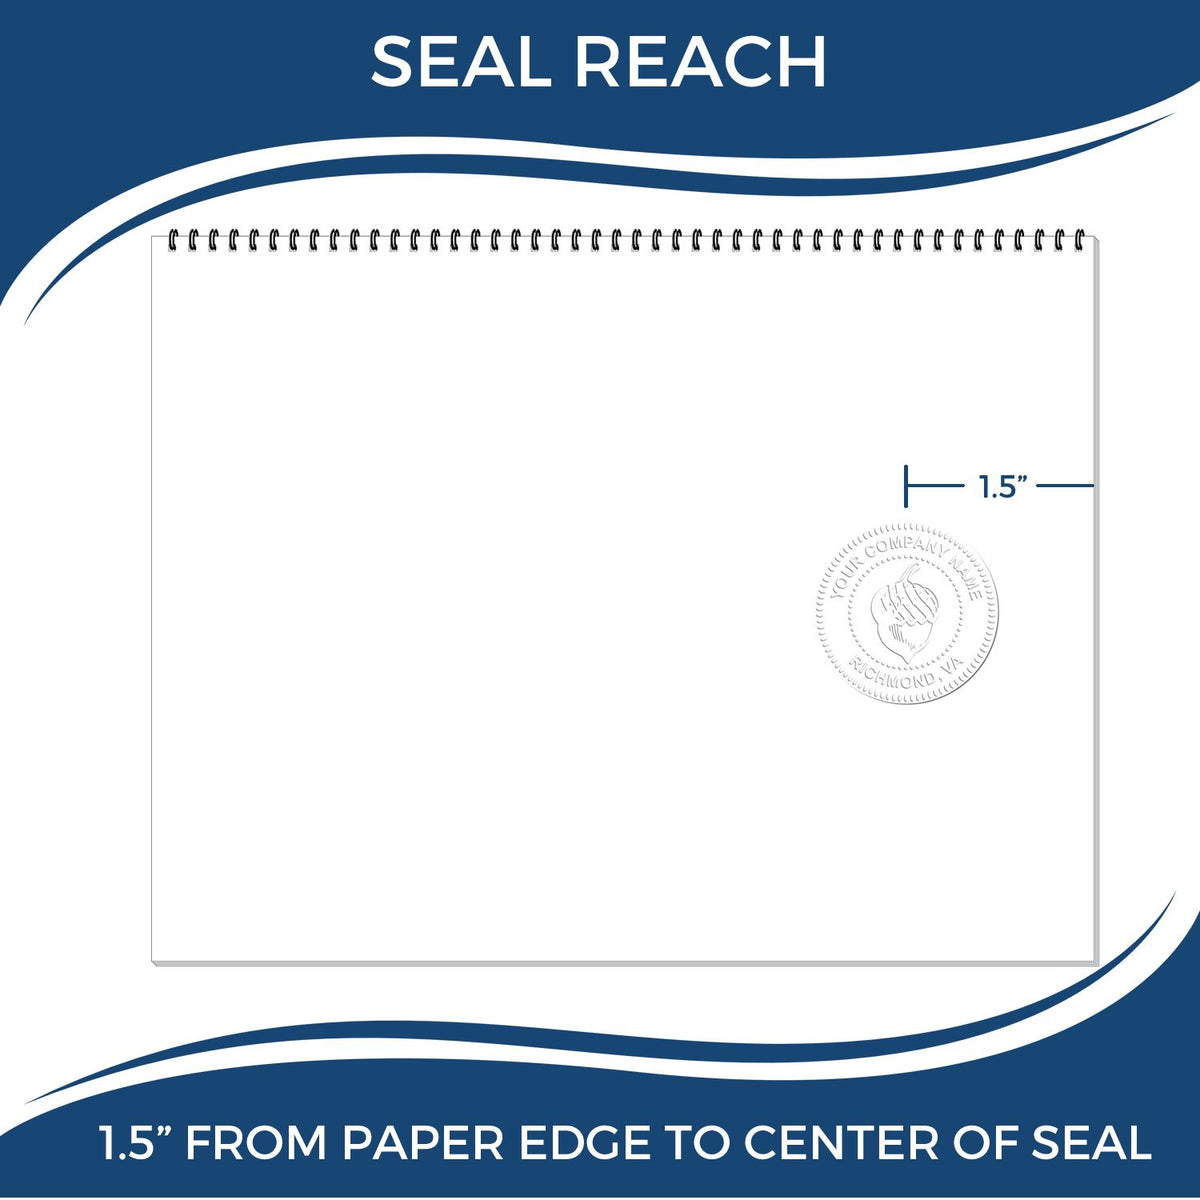 An infographic showing the seal reach which is represented by a ruler and a miniature seal image of the State of Virginia Soft Land Surveyor Embossing Seal